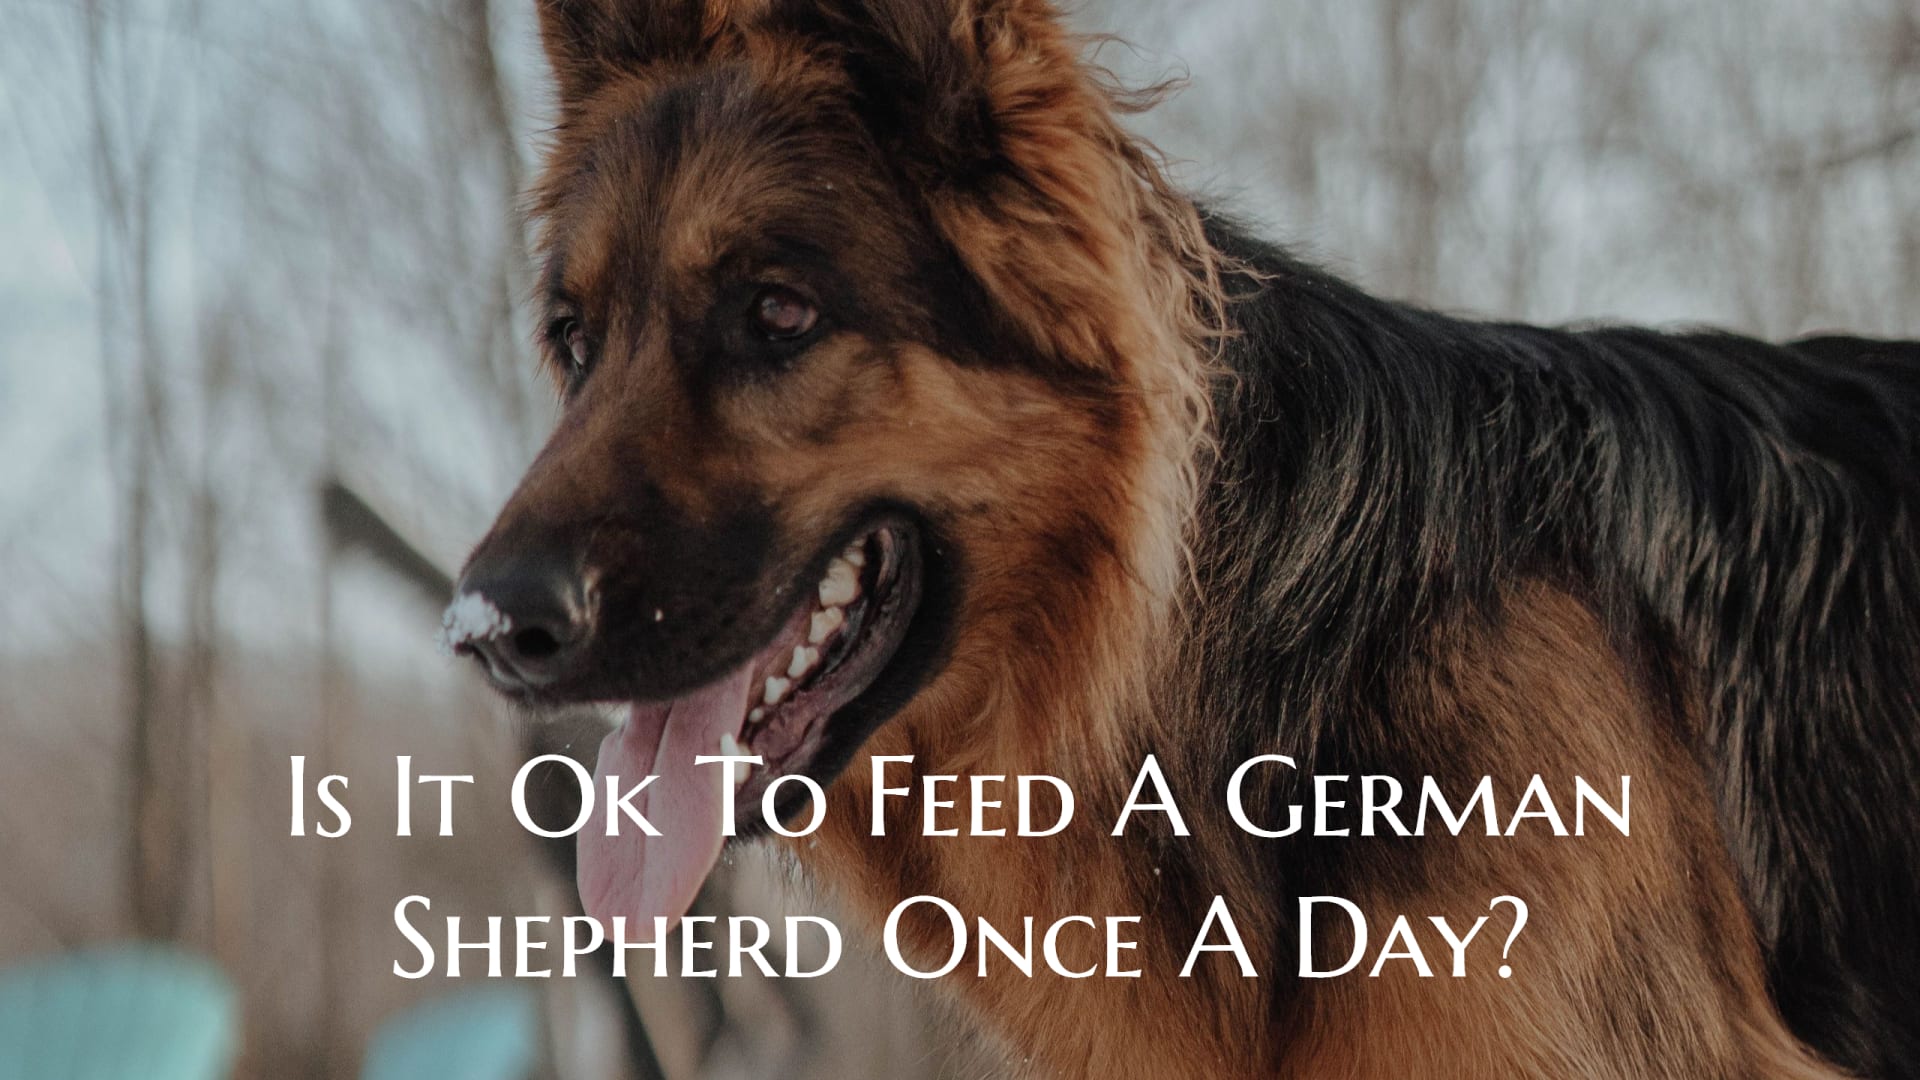 Is It Ok To Feed A German Shepherd Once A Day?